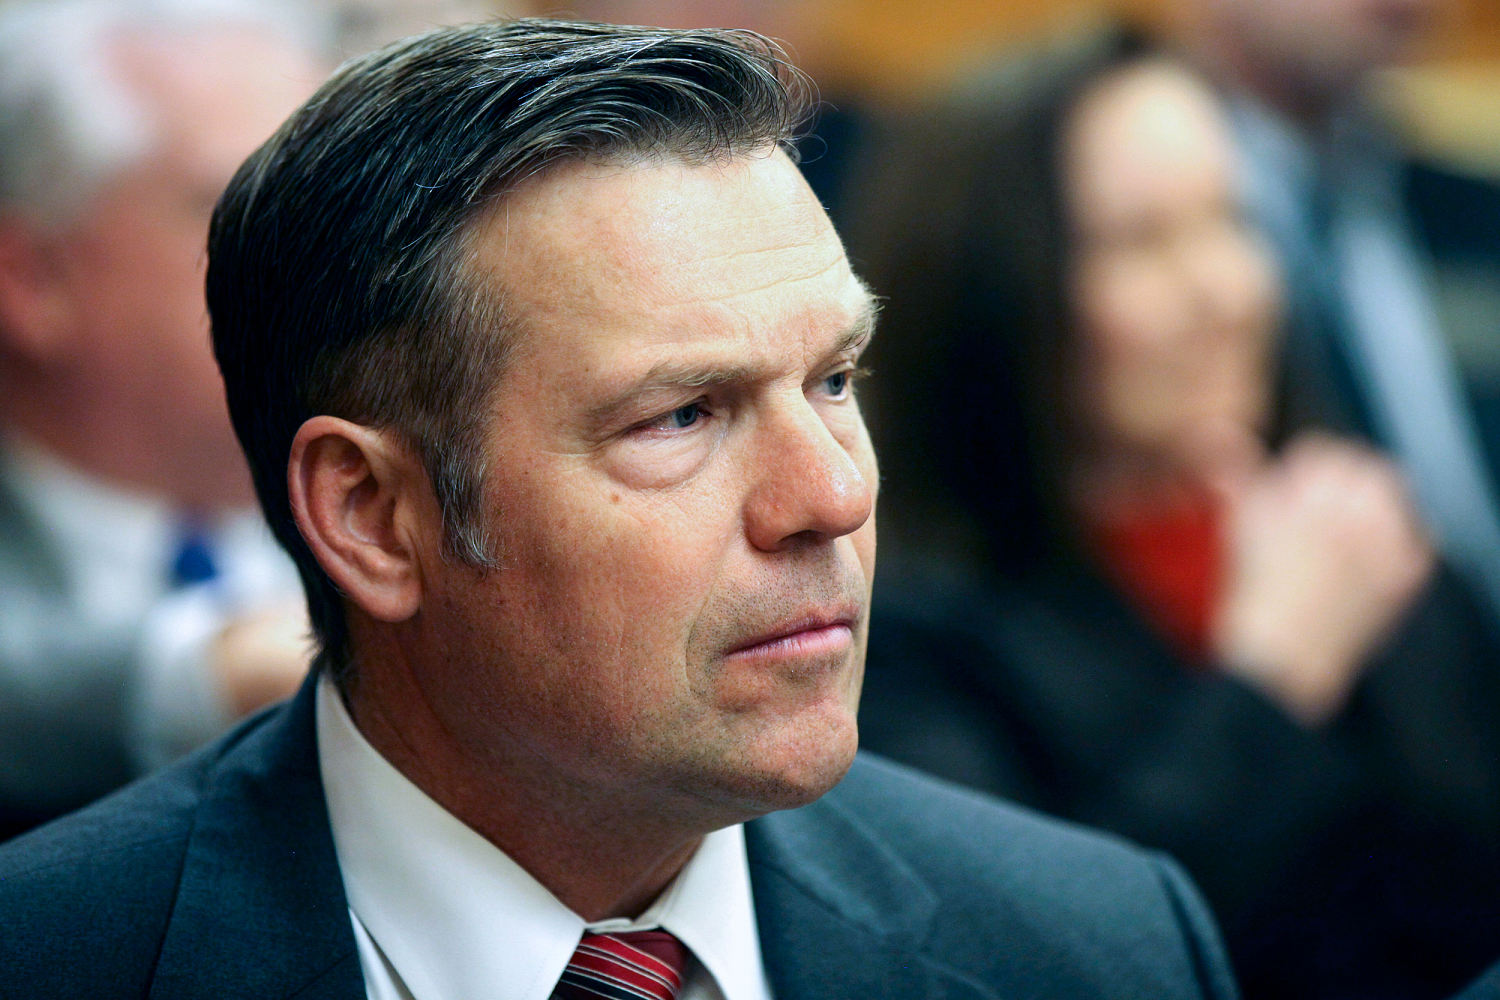 Kansas AG says schools can’t hide trans kids’ gender identities from parents